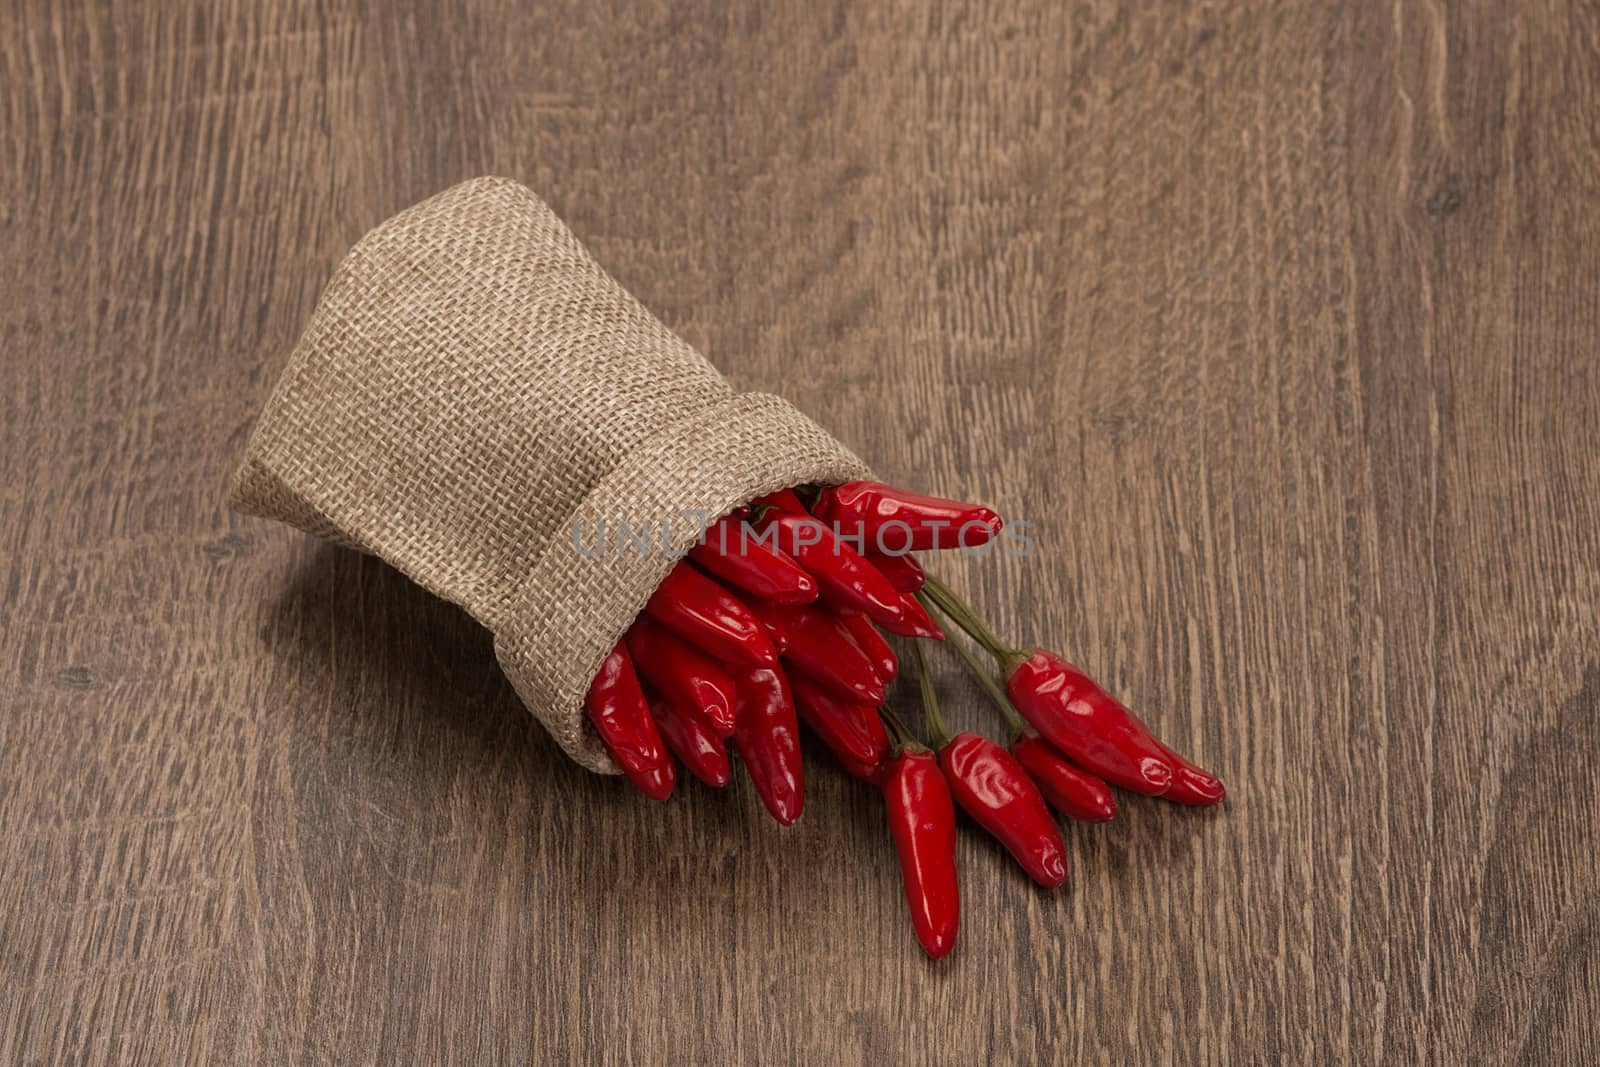 Red chili peppers on dark wooden background. Fresh chili pepper on a wooden board. Growing chili. Healthy spice.